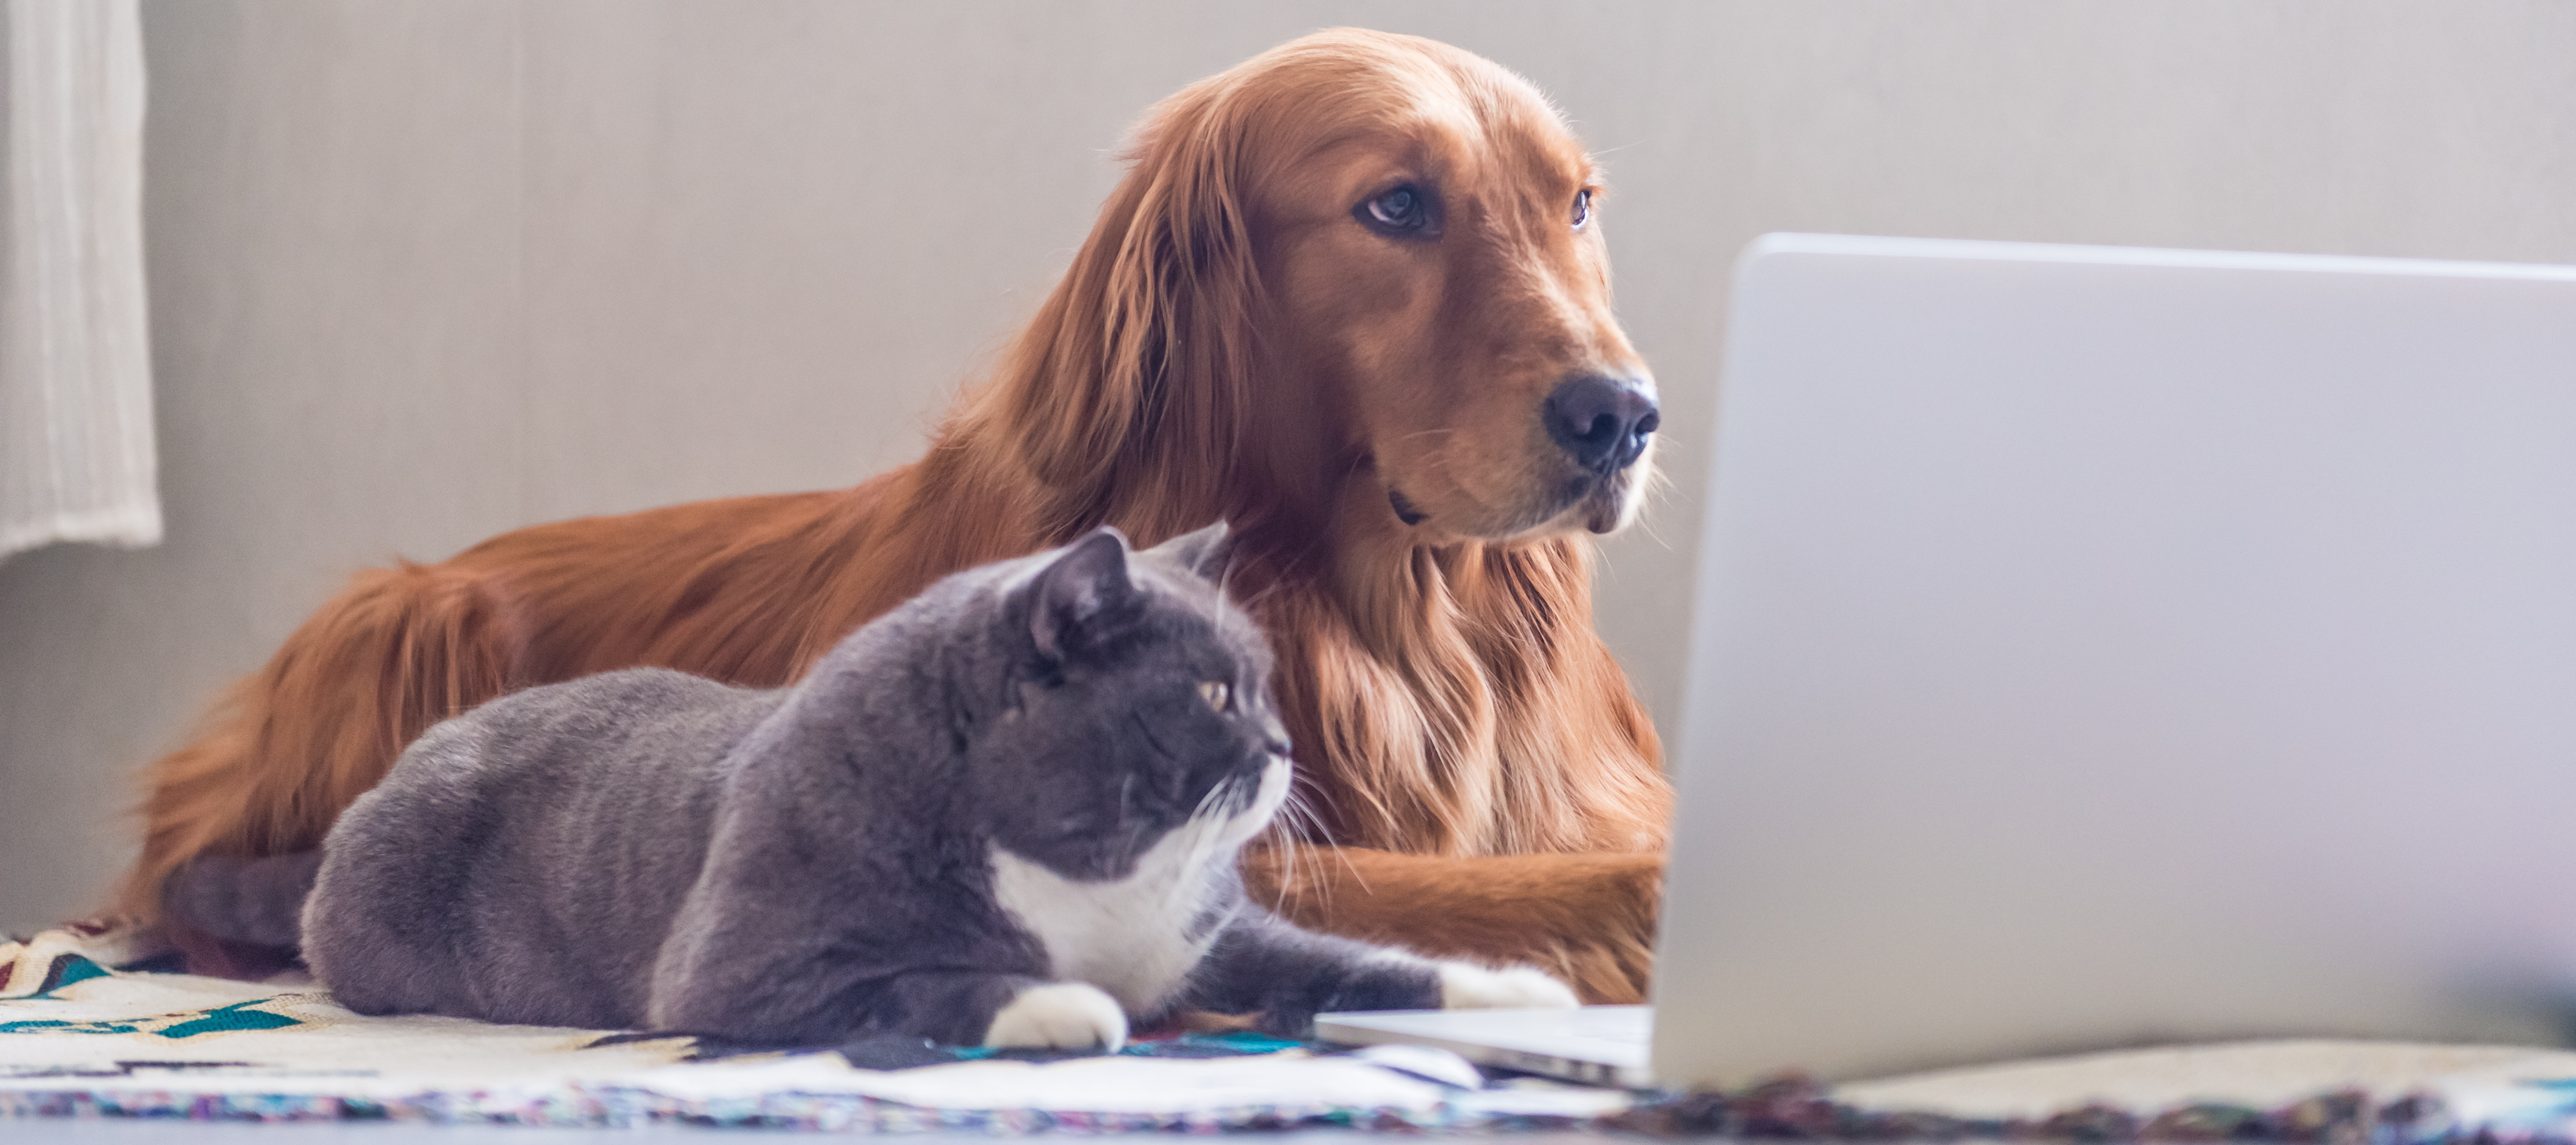 Top apps for looking after pets